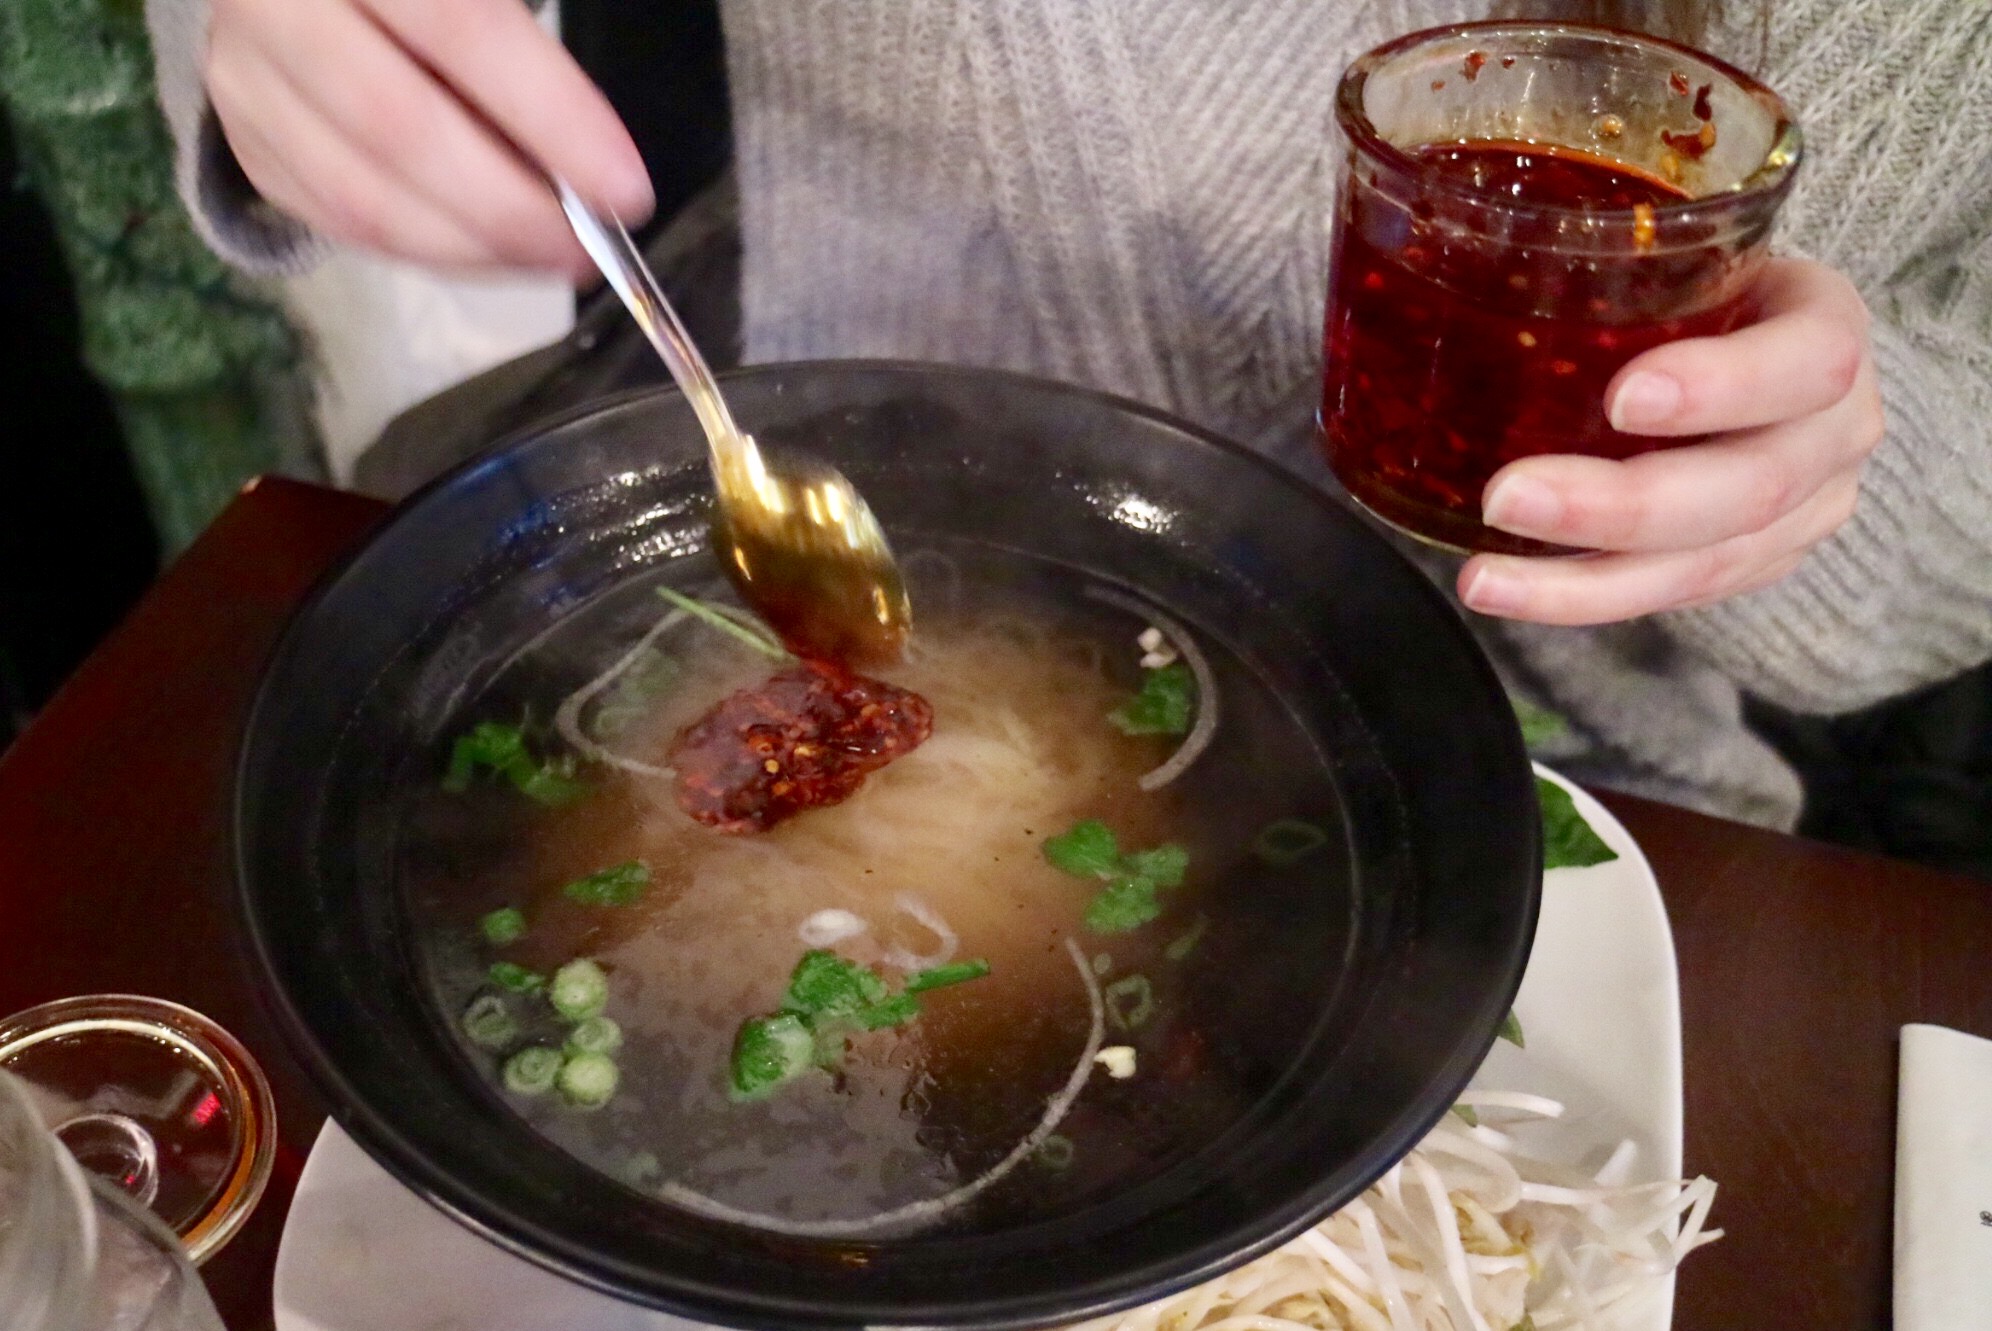 "Build Your Own Pho" with no meat